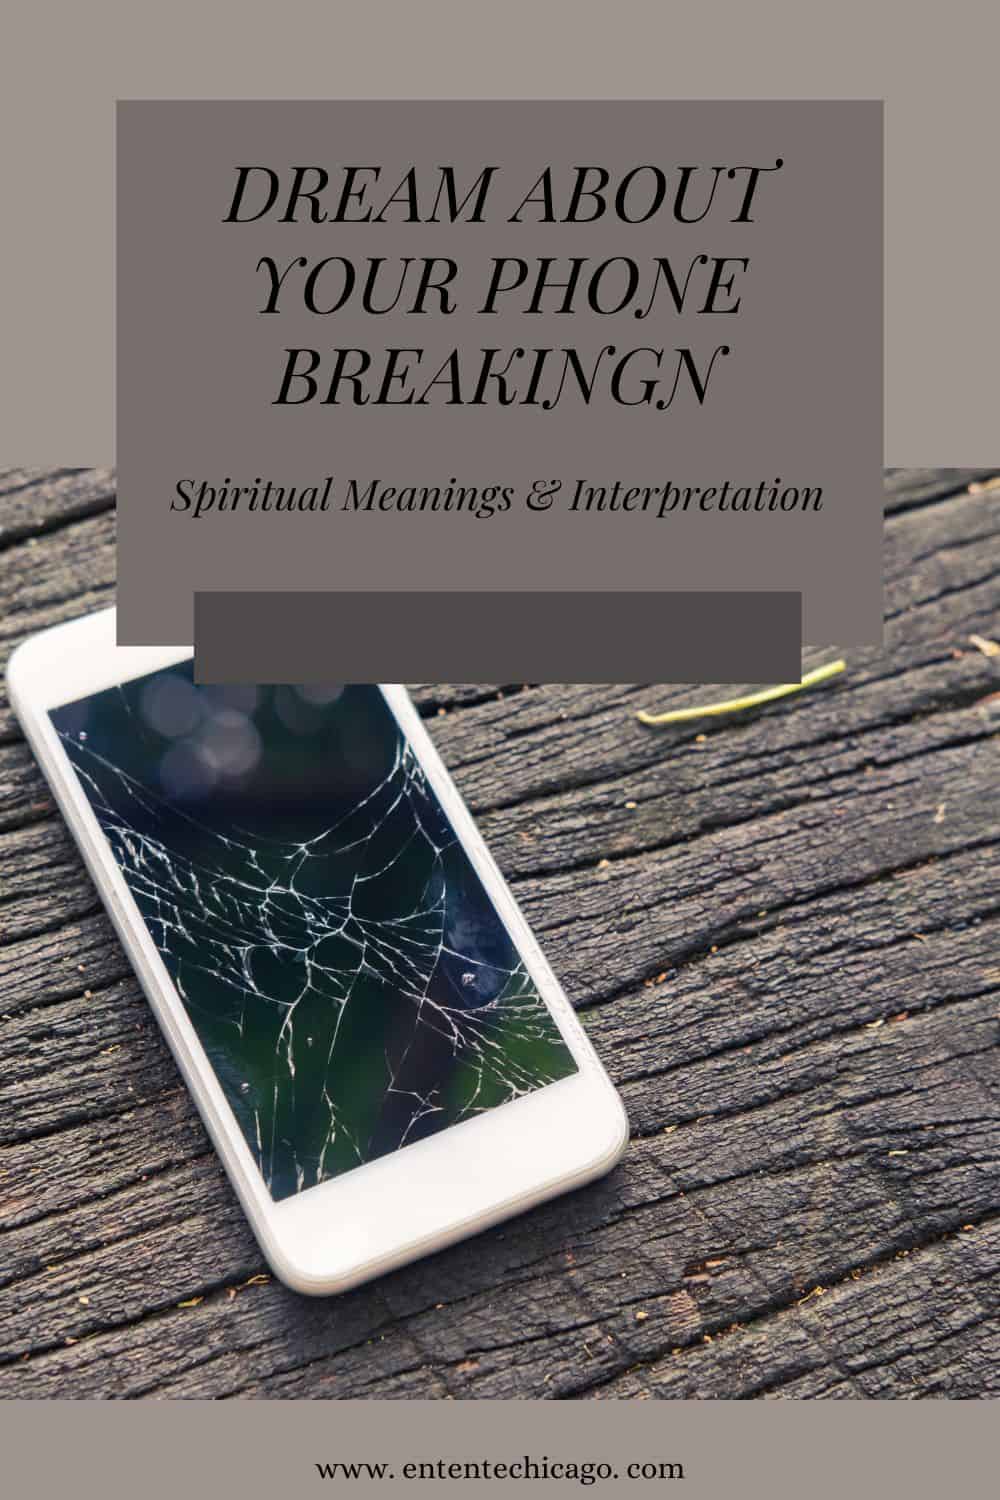 Dream About Your Phone Breaking (Spiritual Meanings & Interpretation)